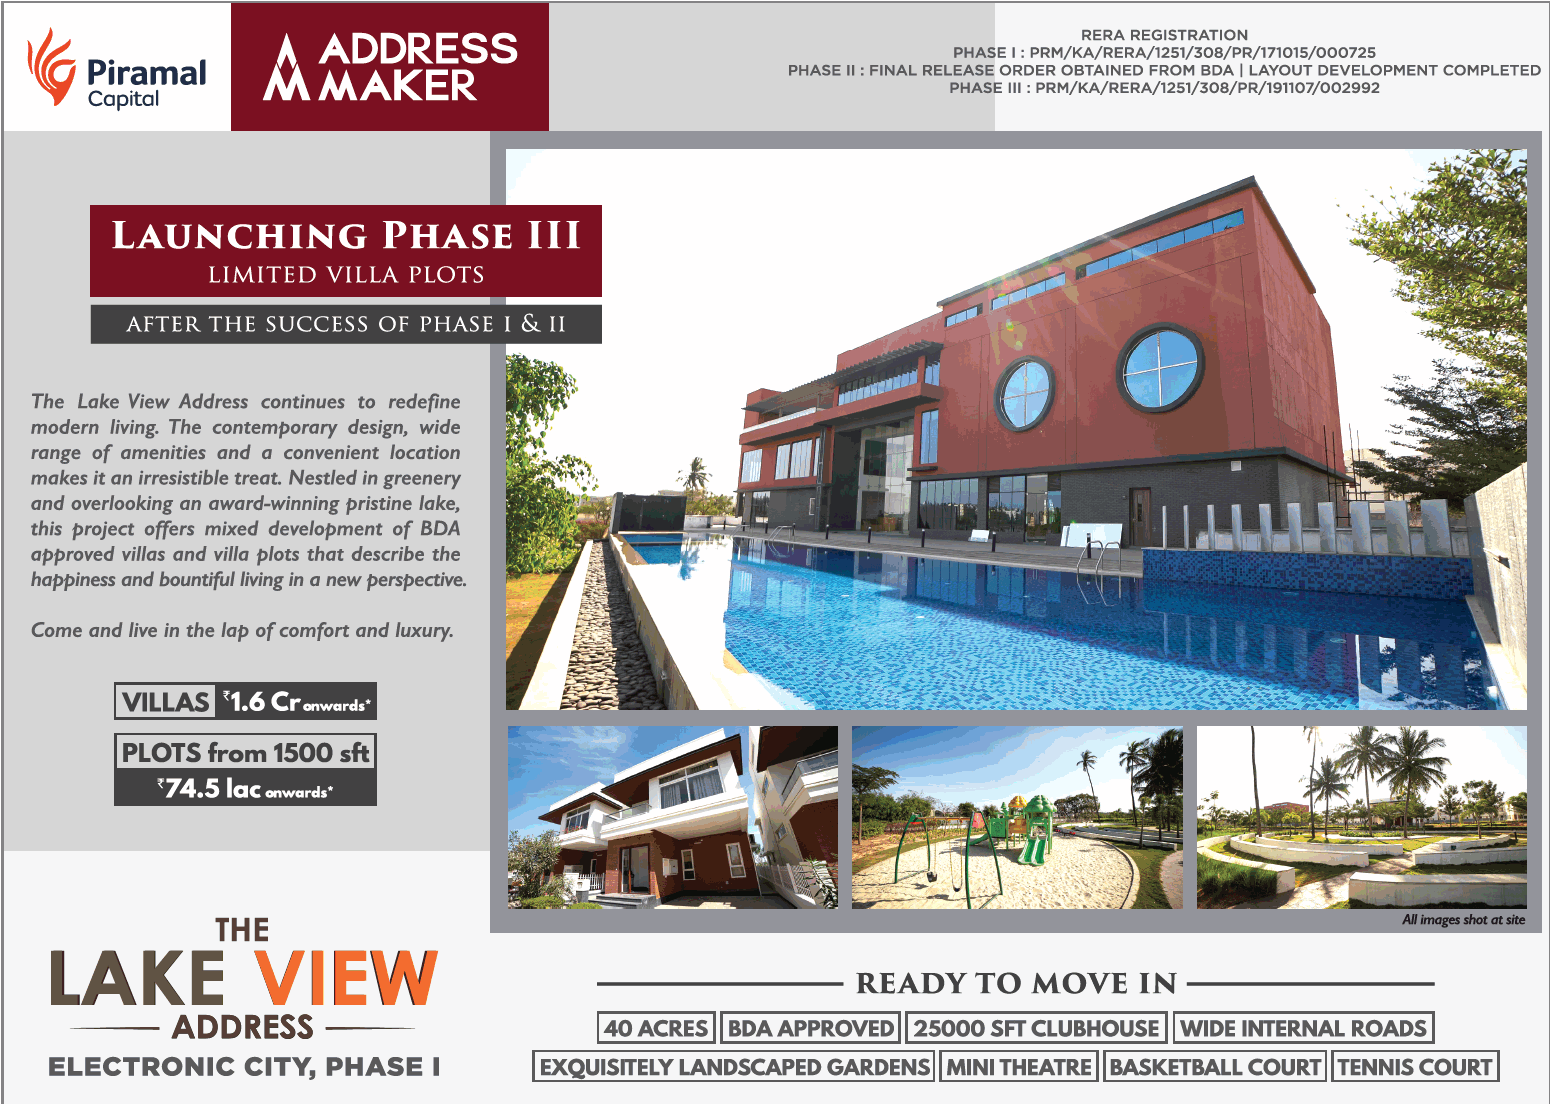 Villas Rs 1.6 Cr onwards at The Lake View Address in Bangalore